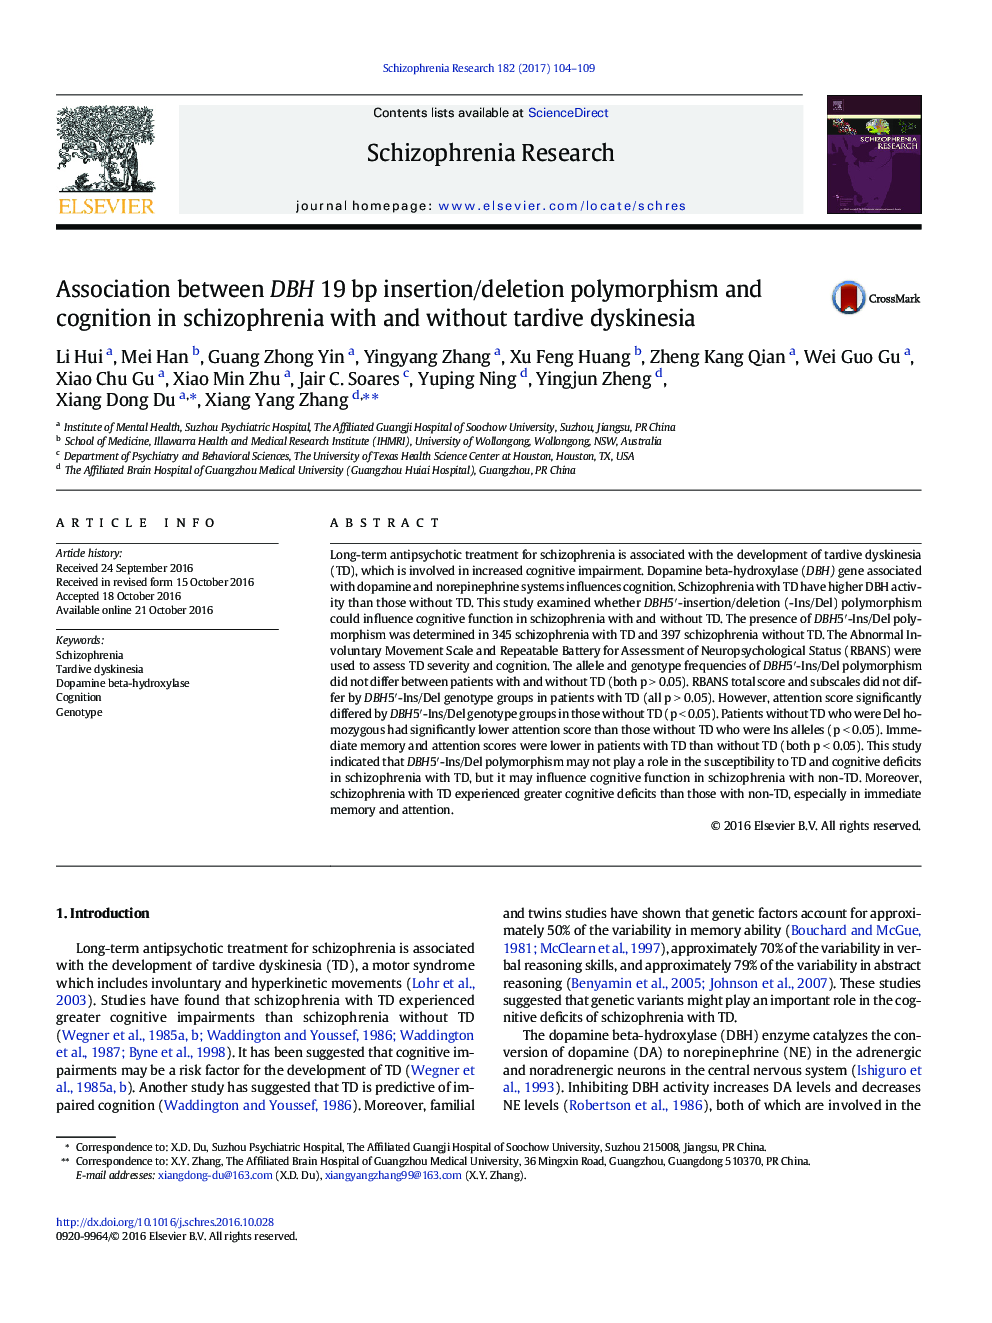 Association between DBH 19Â bp insertion/deletion polymorphism and cognition in schizophrenia with and without tardive dyskinesia